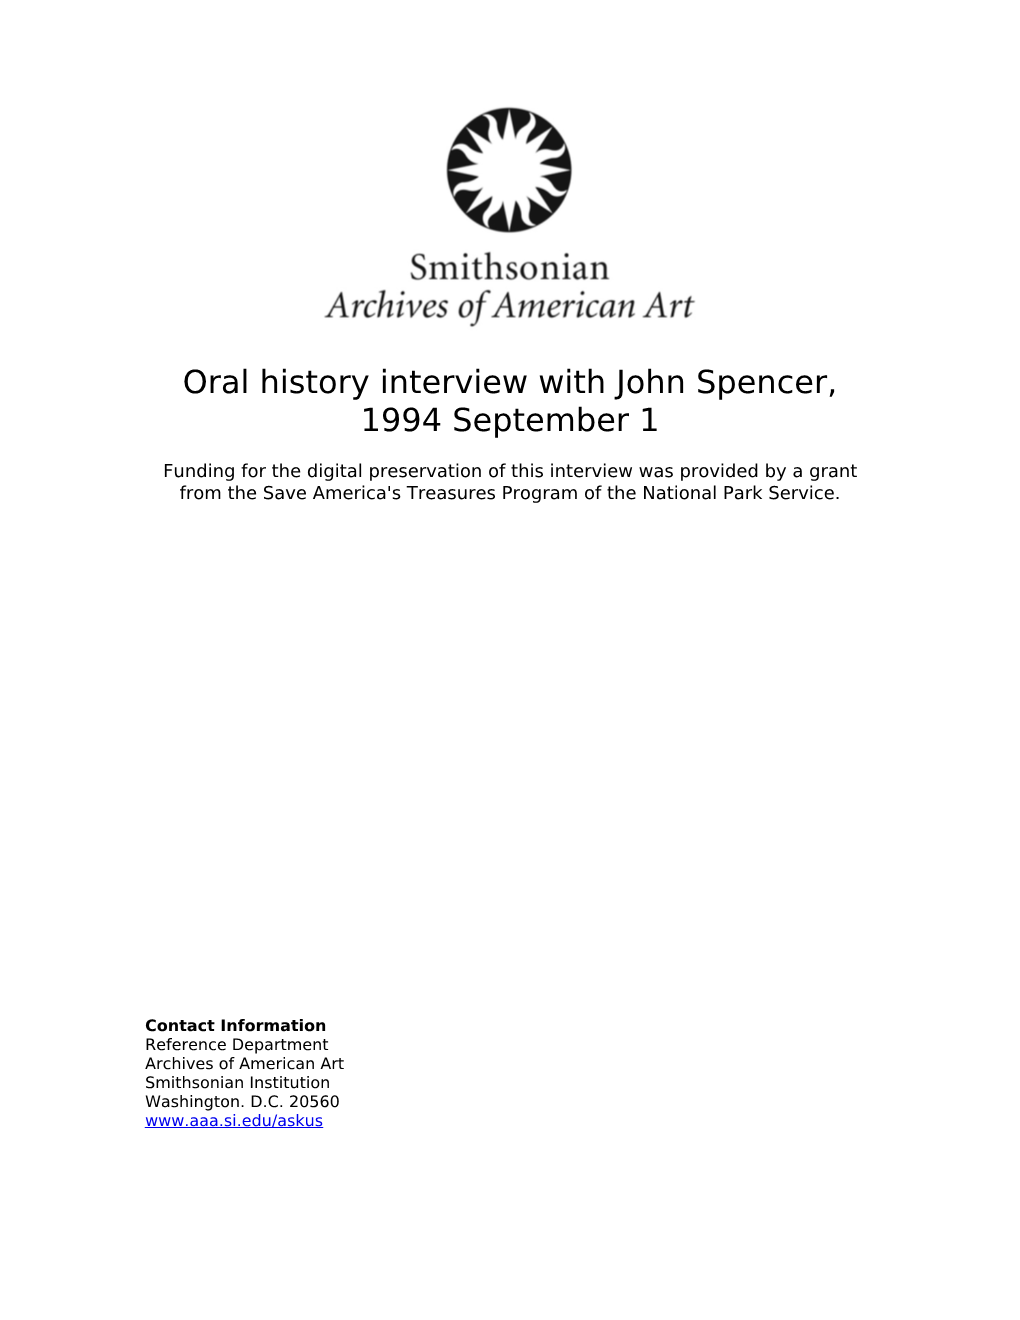 Oral History Interview with John Spencer, 1994 September 1